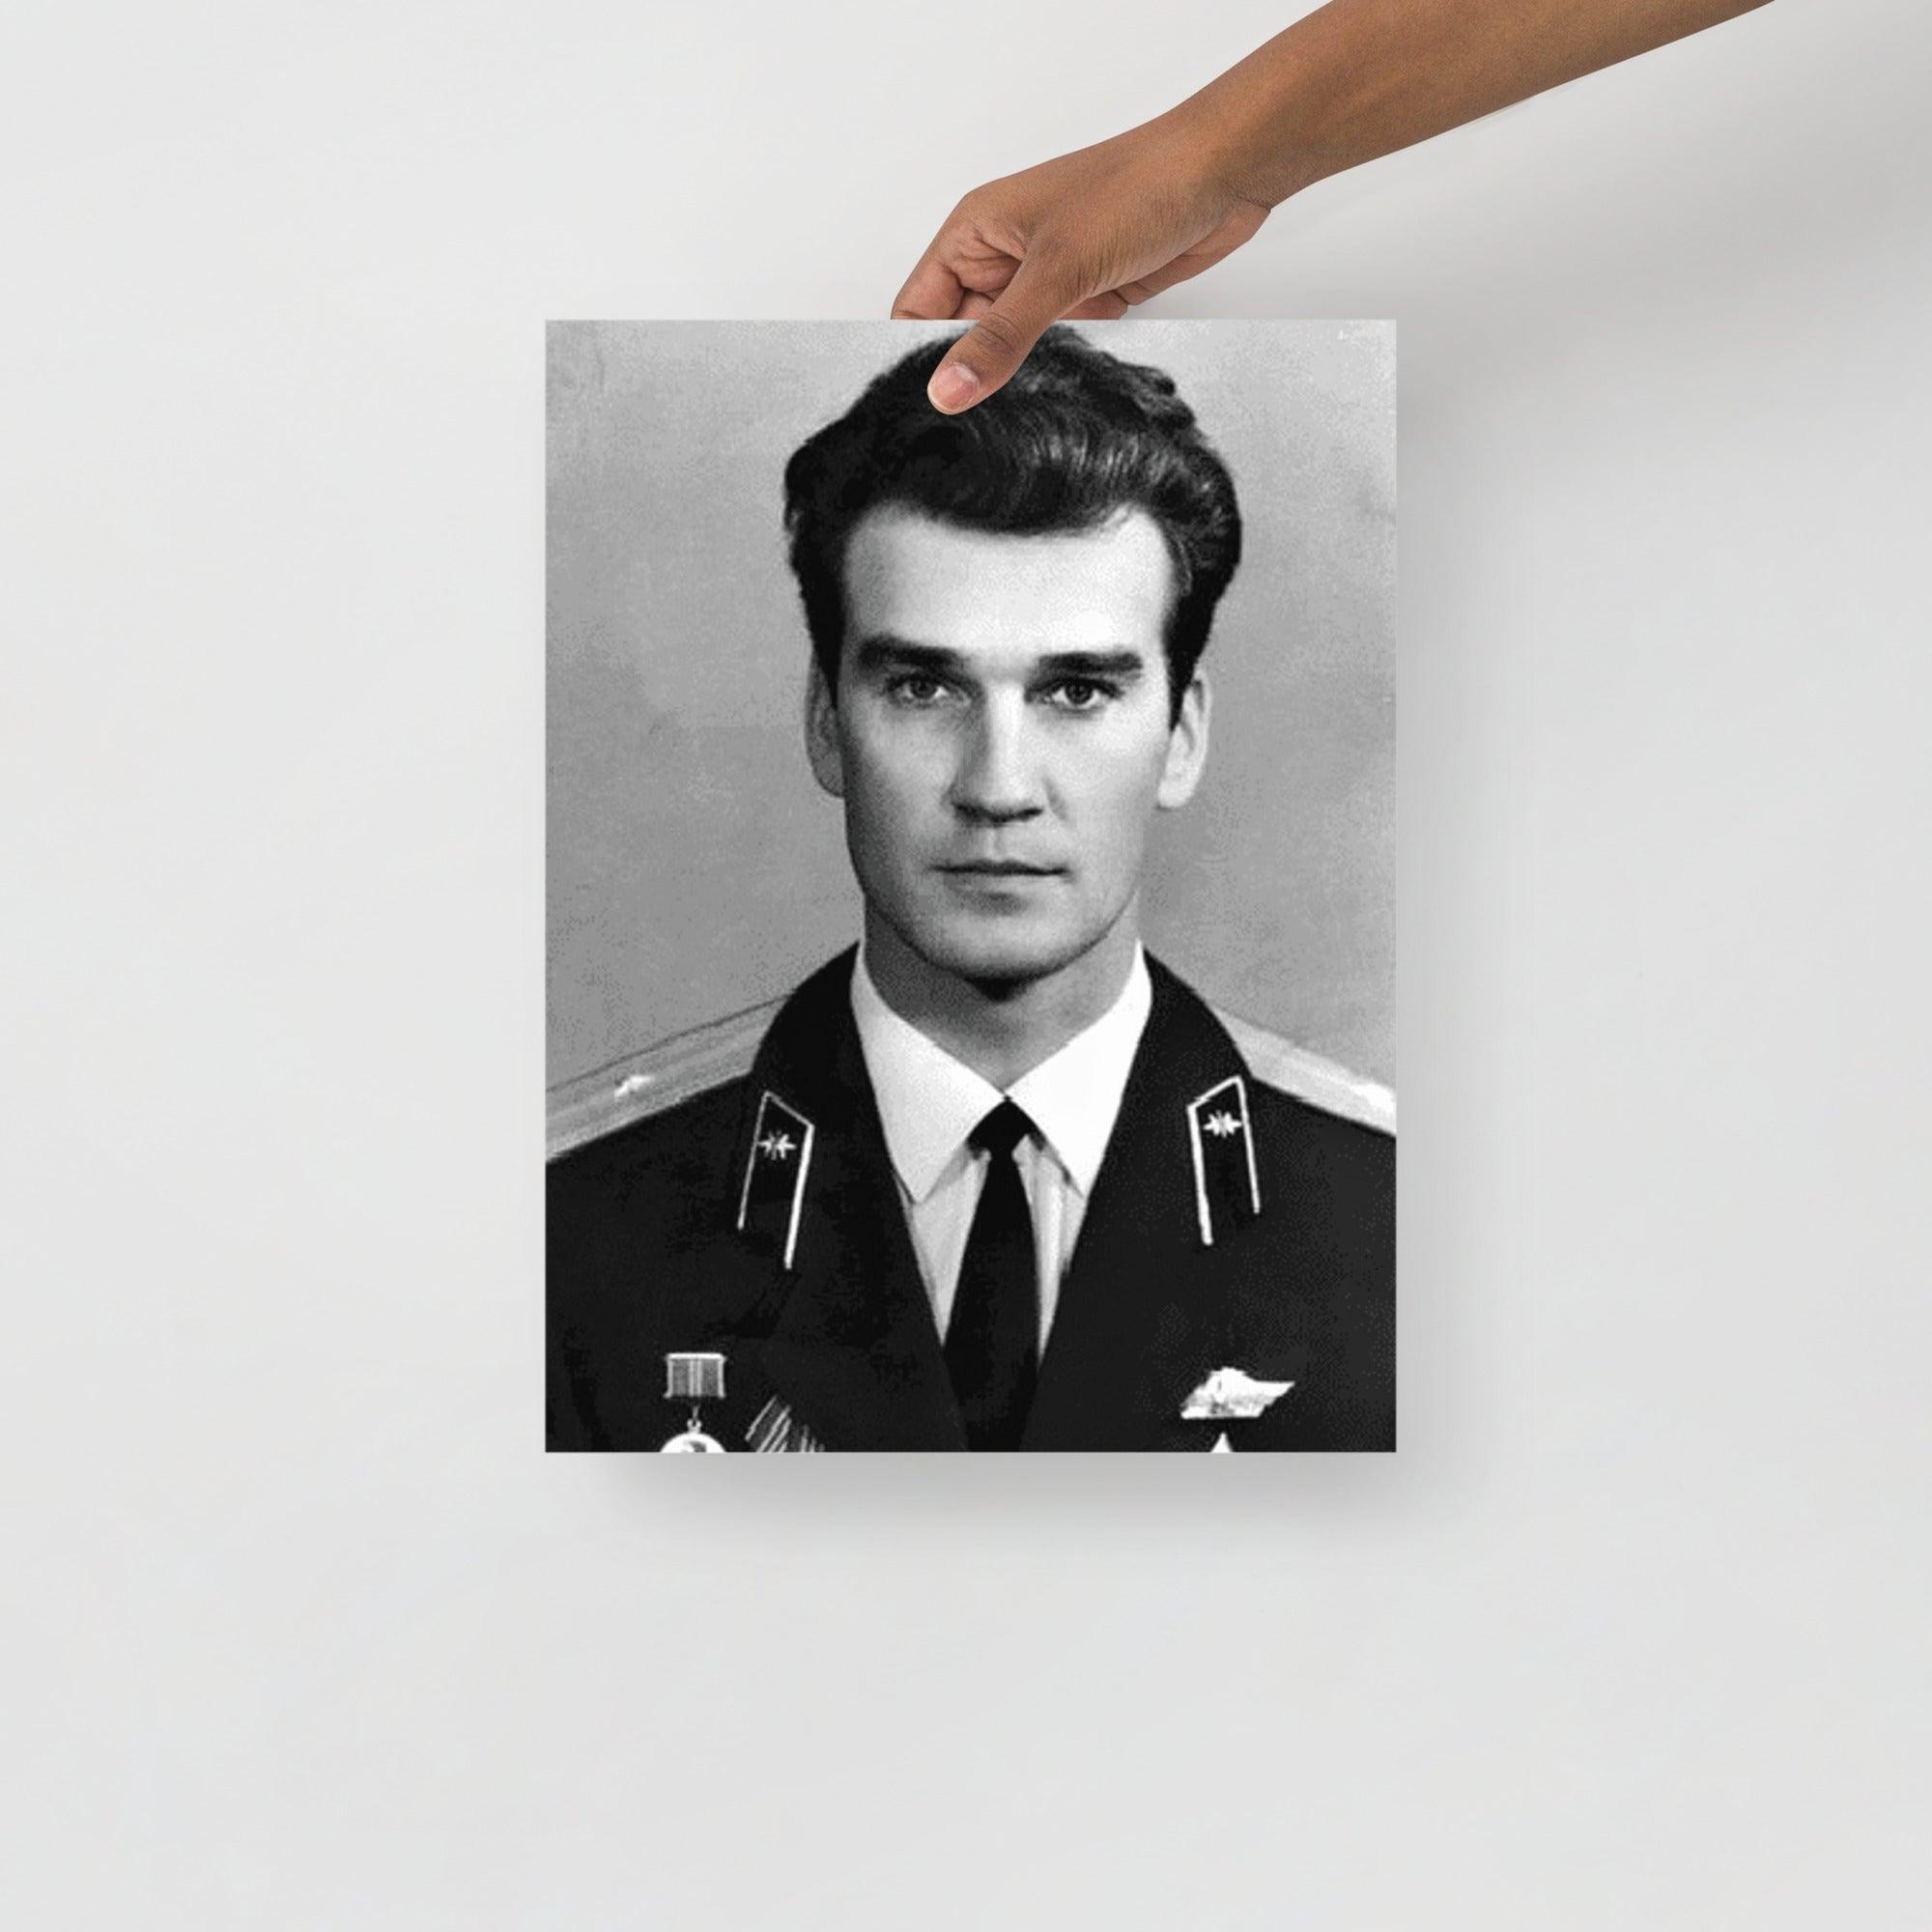 A Stanislav Petrov poster on a plain backdrop in size 12x16”.